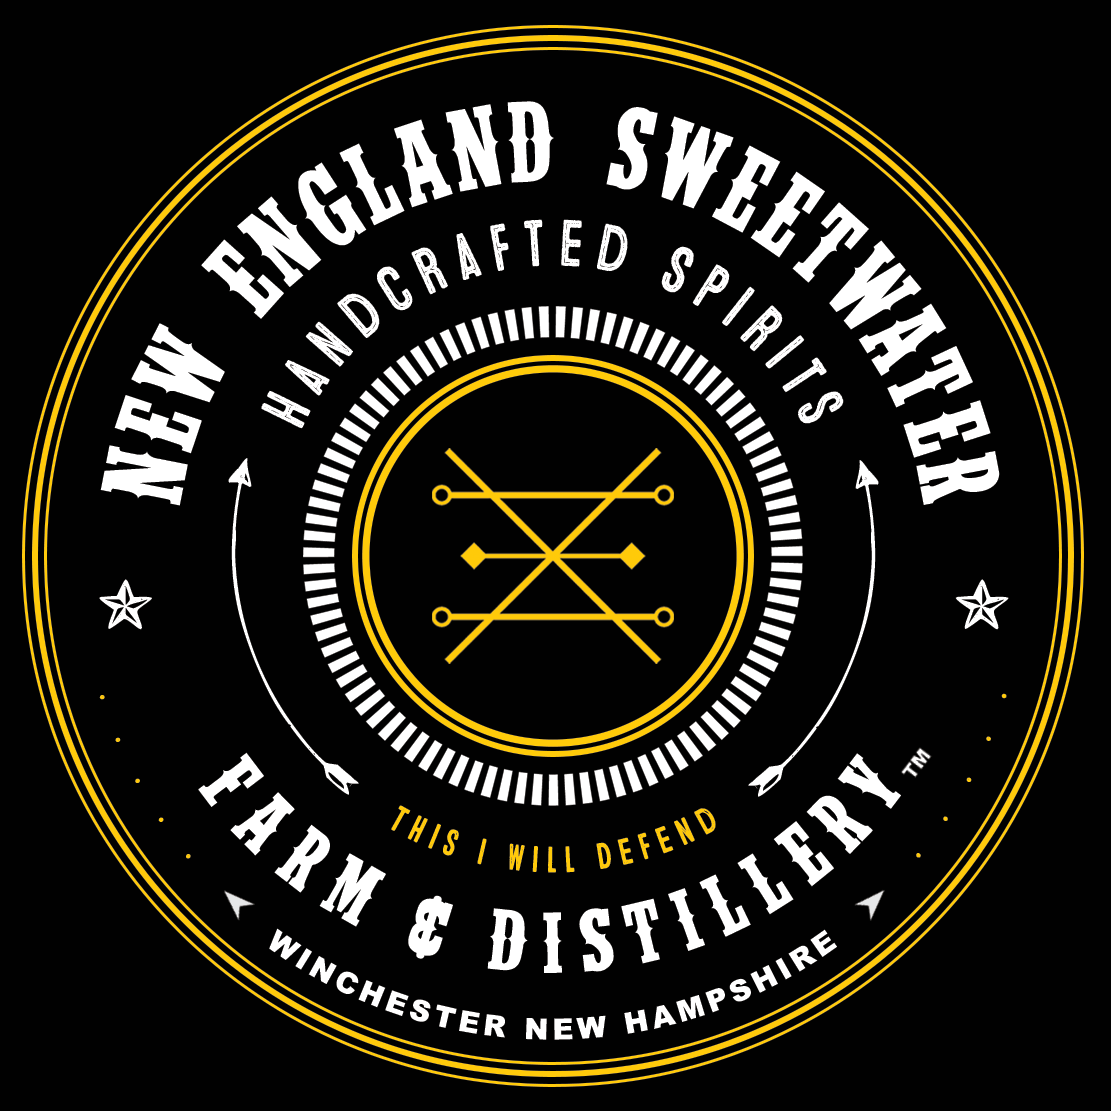 We offer outstanding handcrafted spirits - from American Single Malt Whiskey, Moonshine, and Bourbon to premium and infused Vodkas, Gin and Rum.